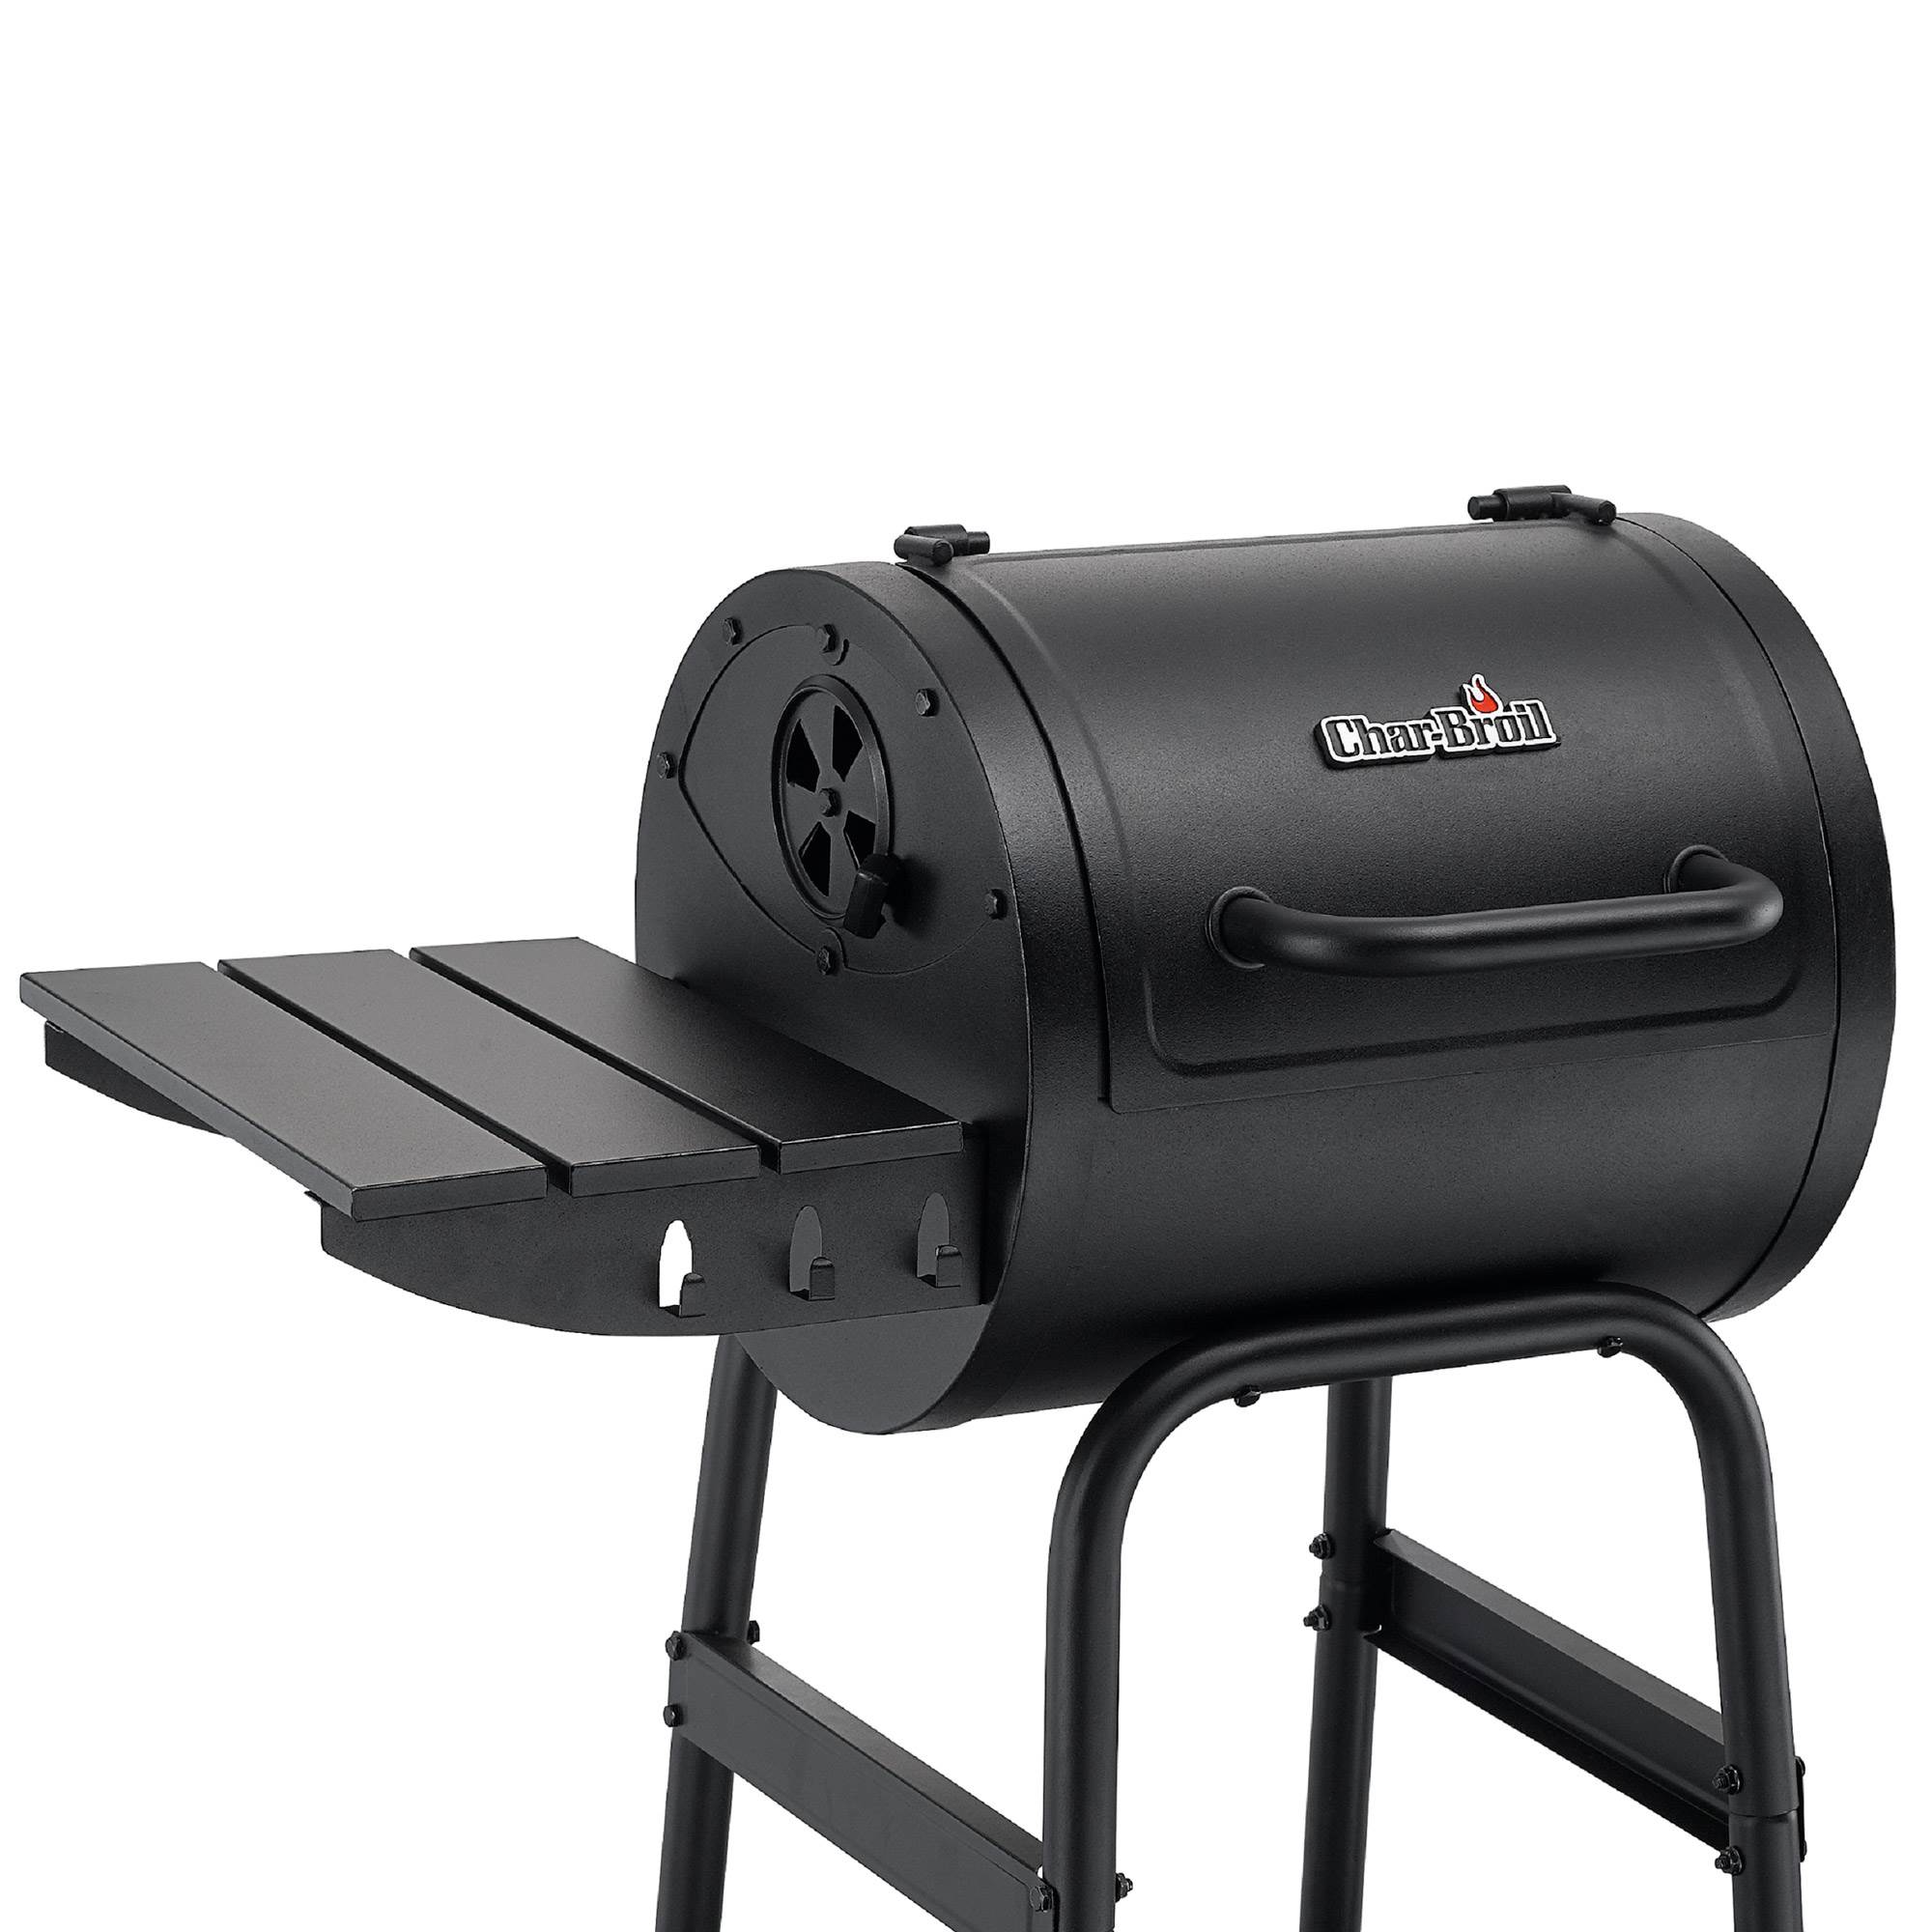 Char-Broil American Gourmet 18-inch Charcoal Barrel Grill - image 4 of 6